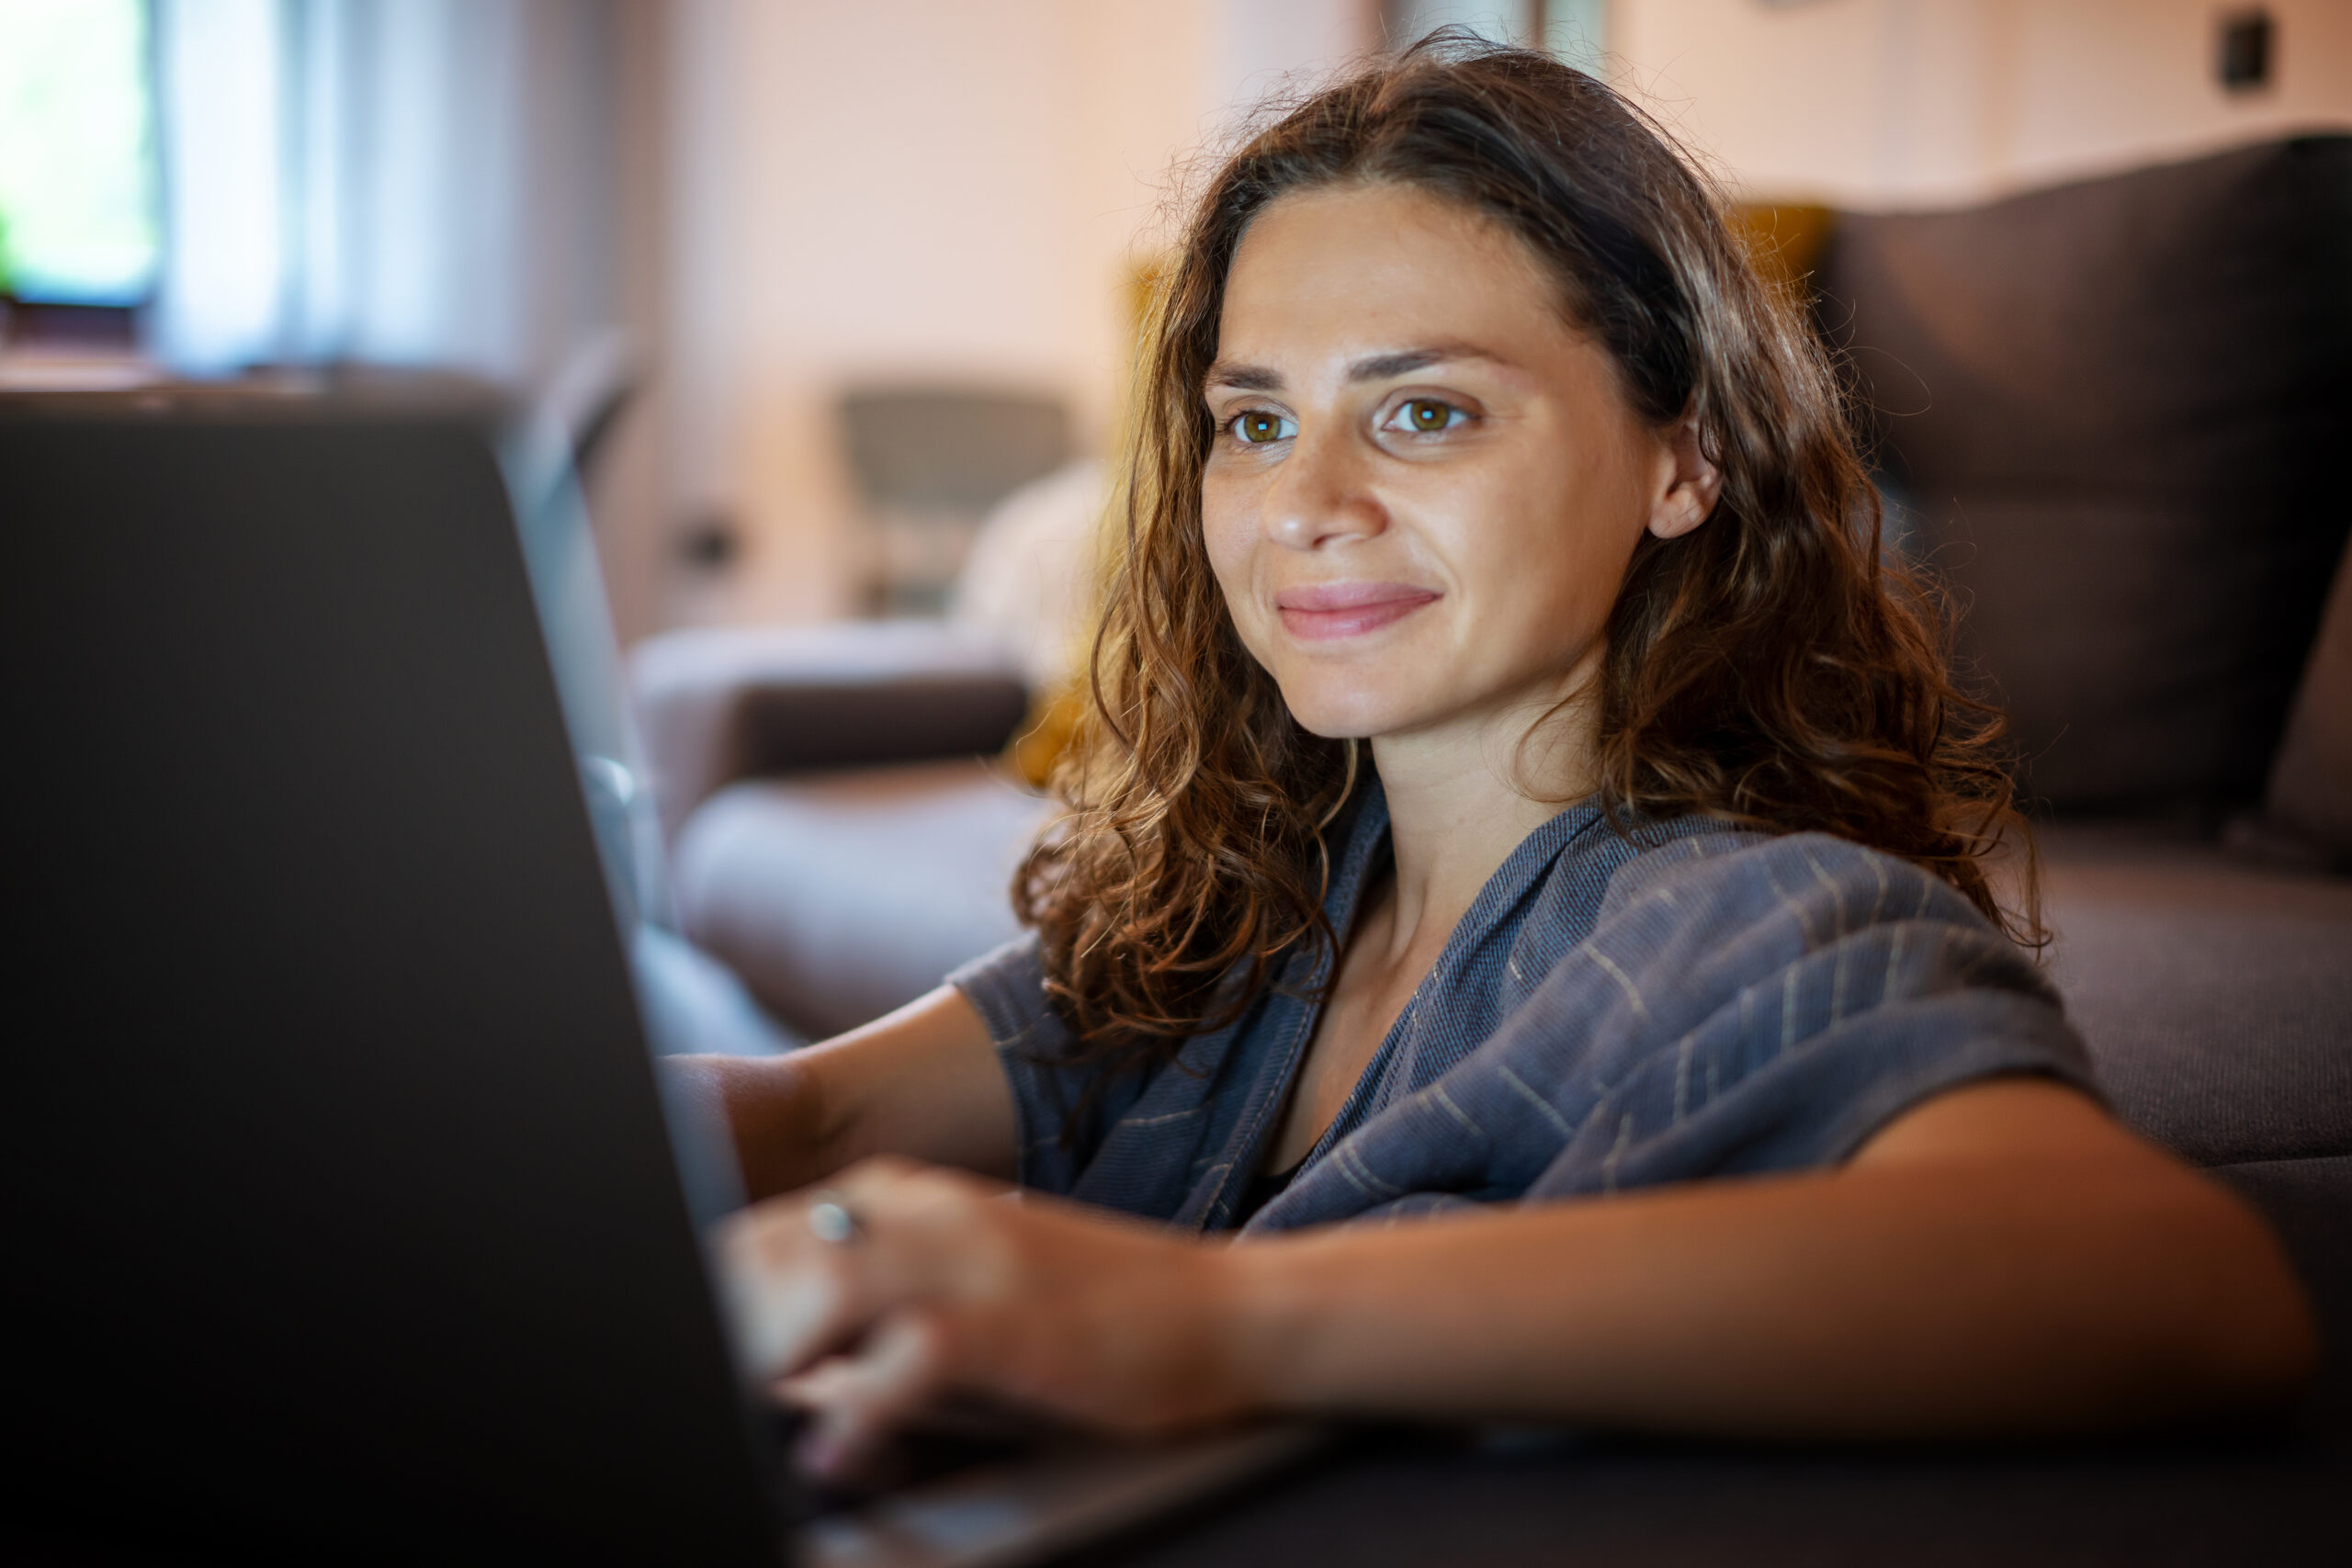 young woman looking into laptop screen while sitting on sofa at home